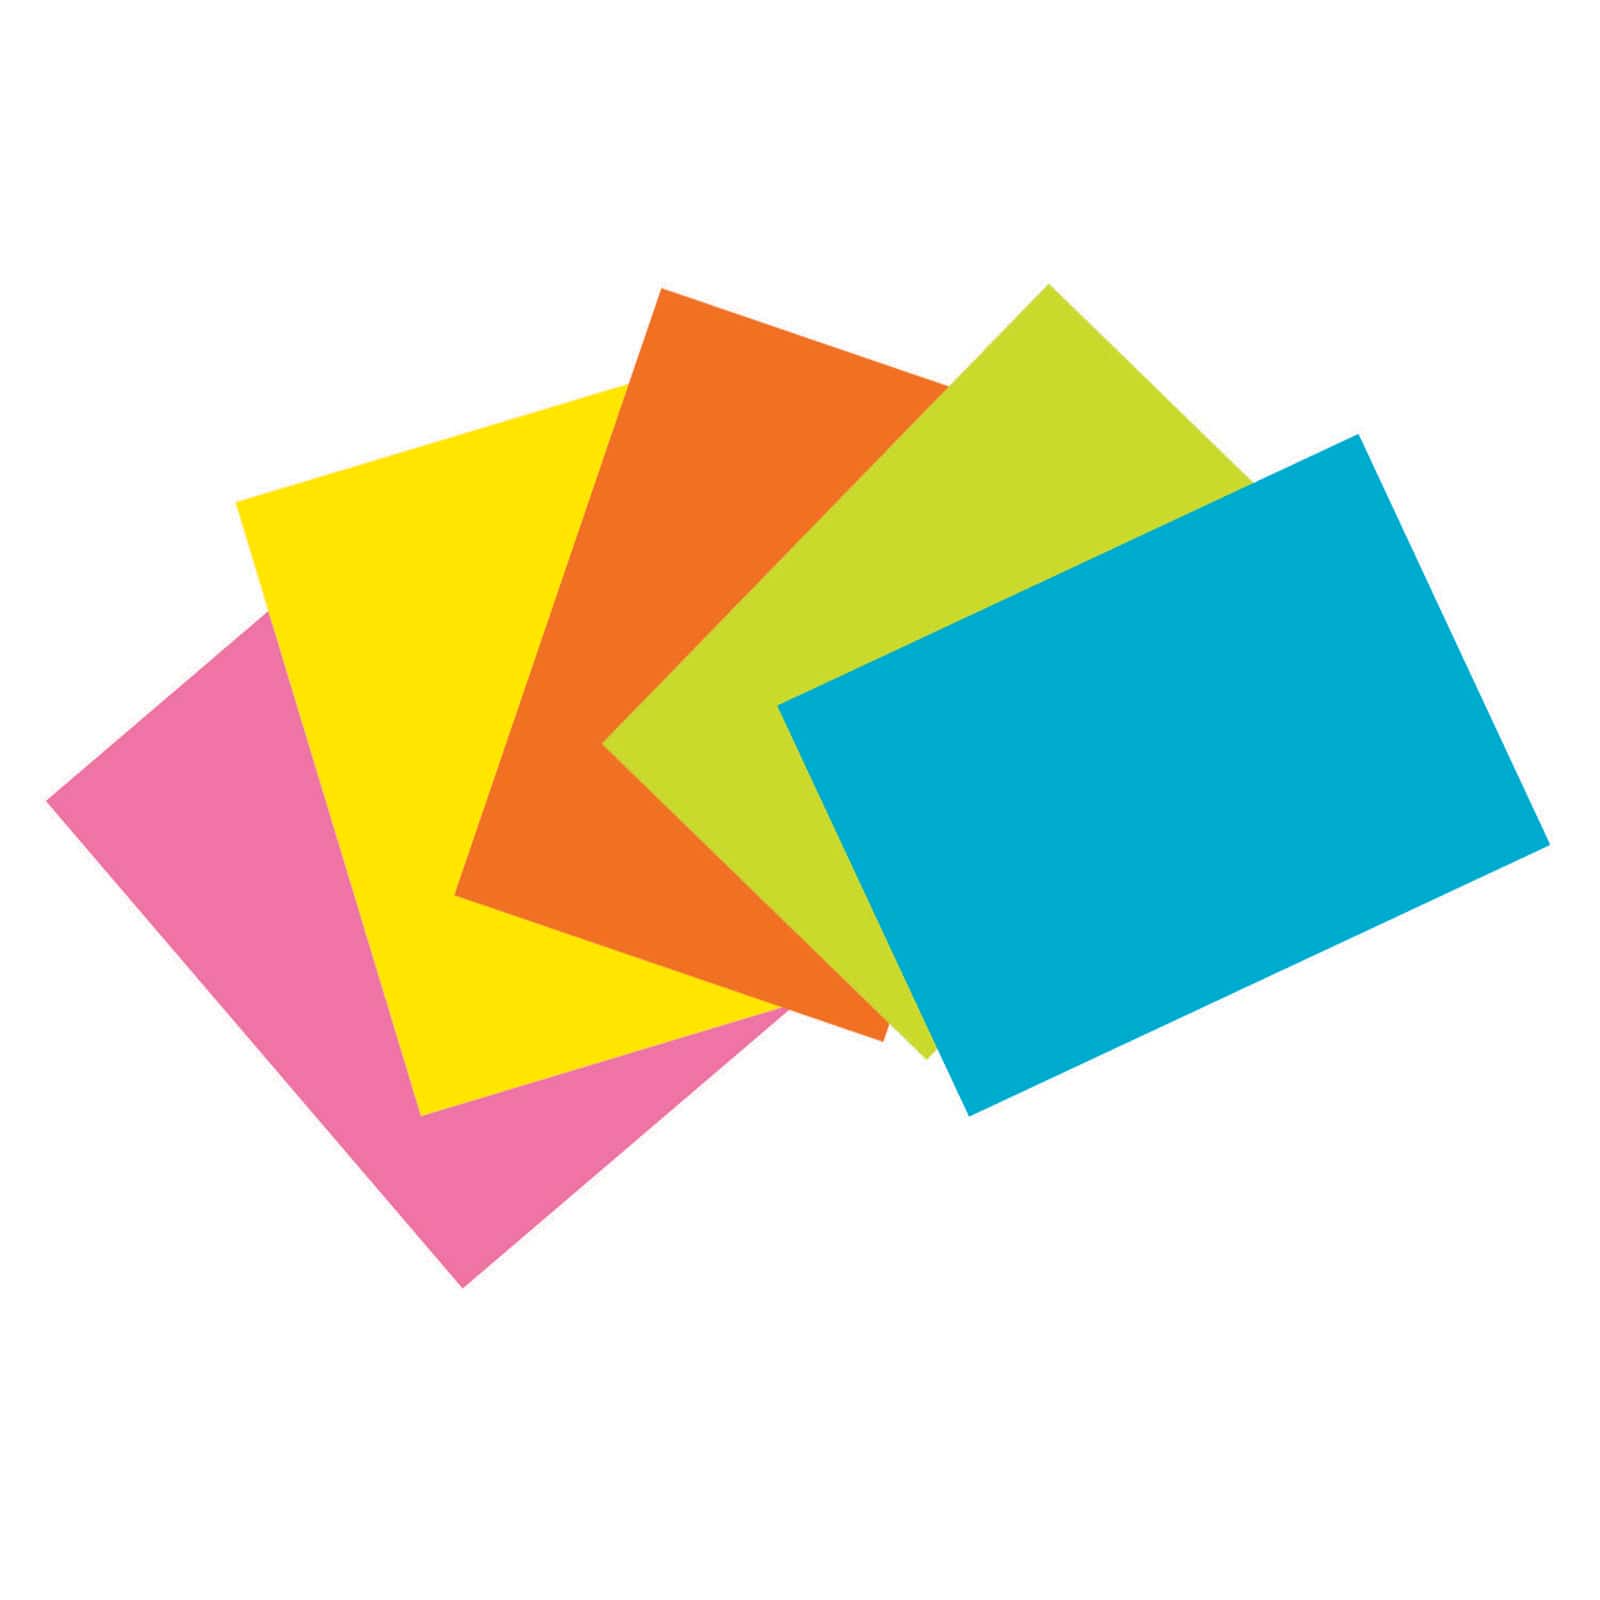 Colored Index Cards